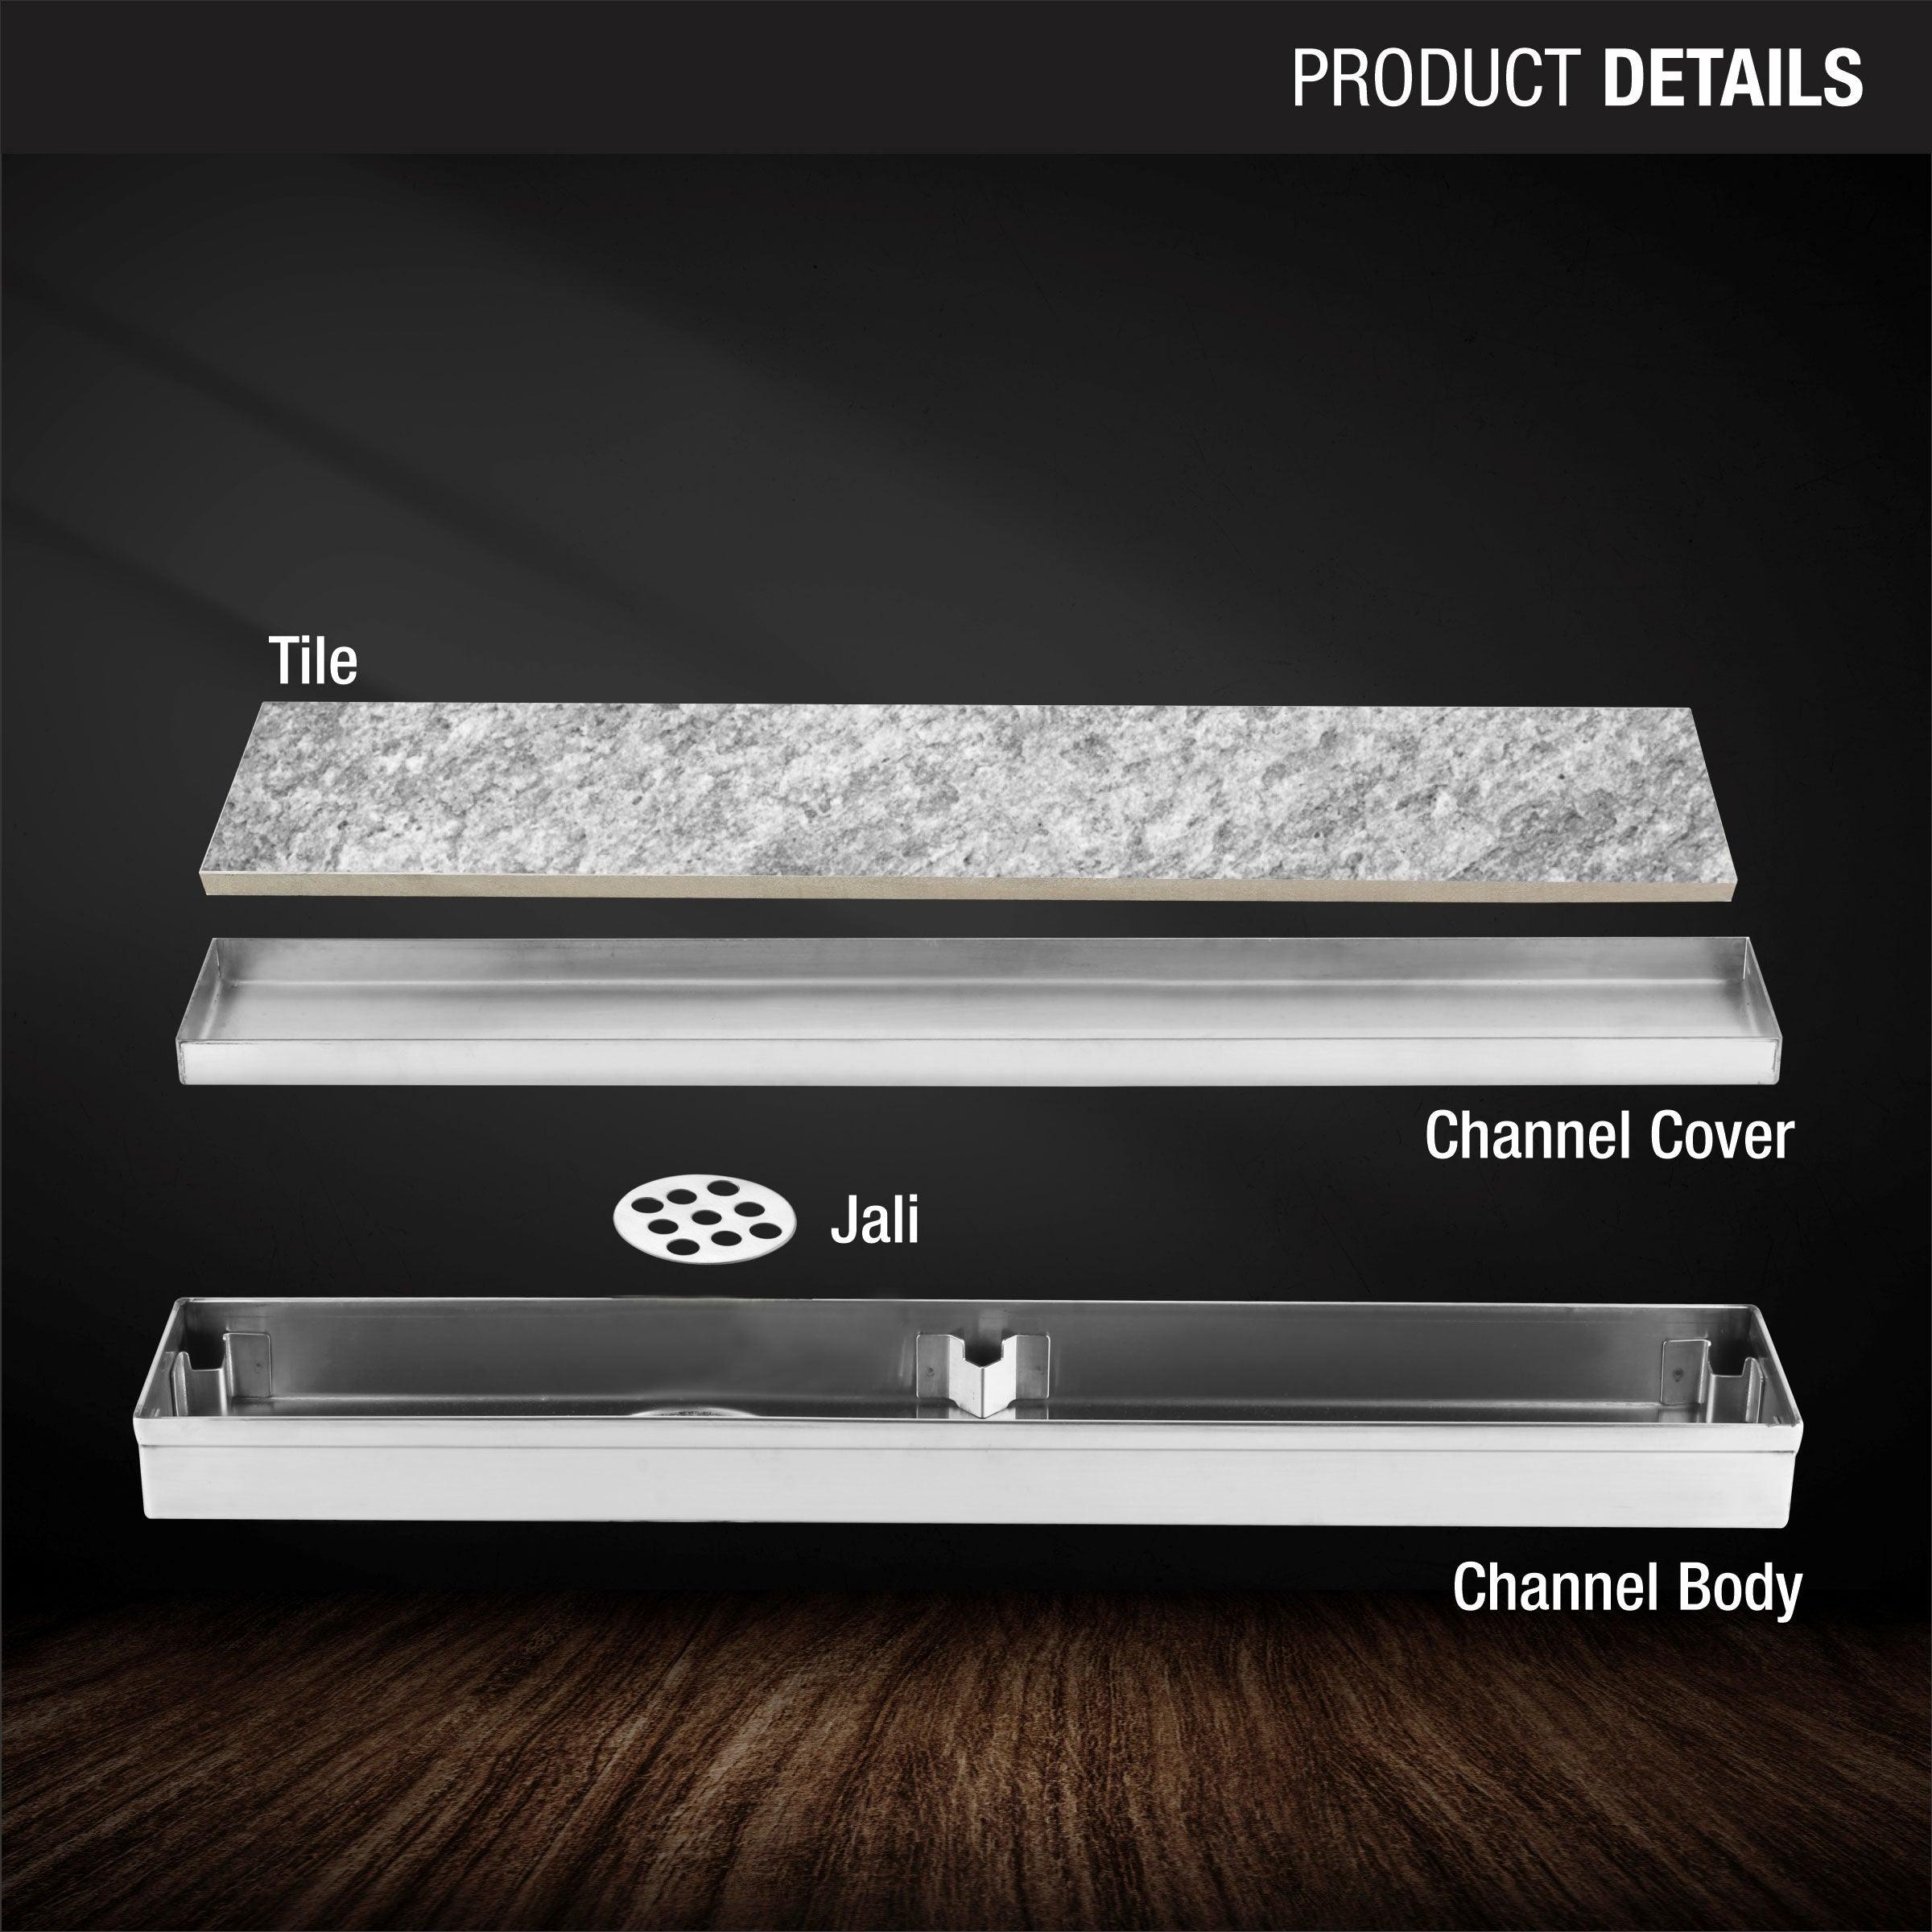 Tile Insert Shower Drain Channel (24 x 2 Inches) product details